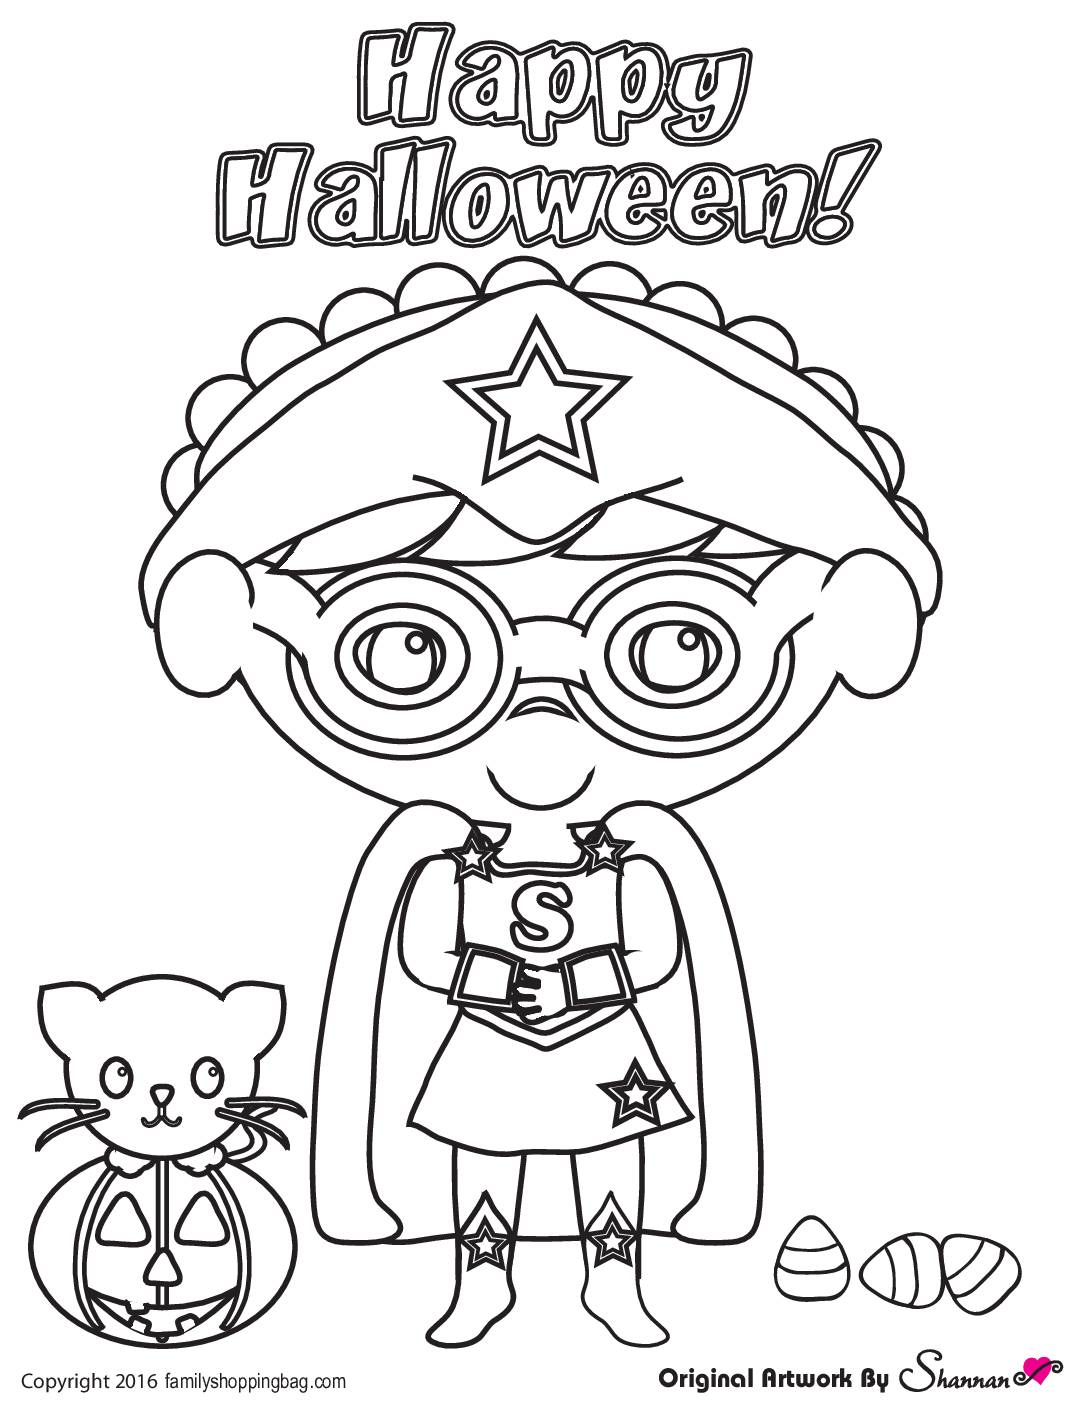 Halloween Coloring Page 2 Coloring Pages